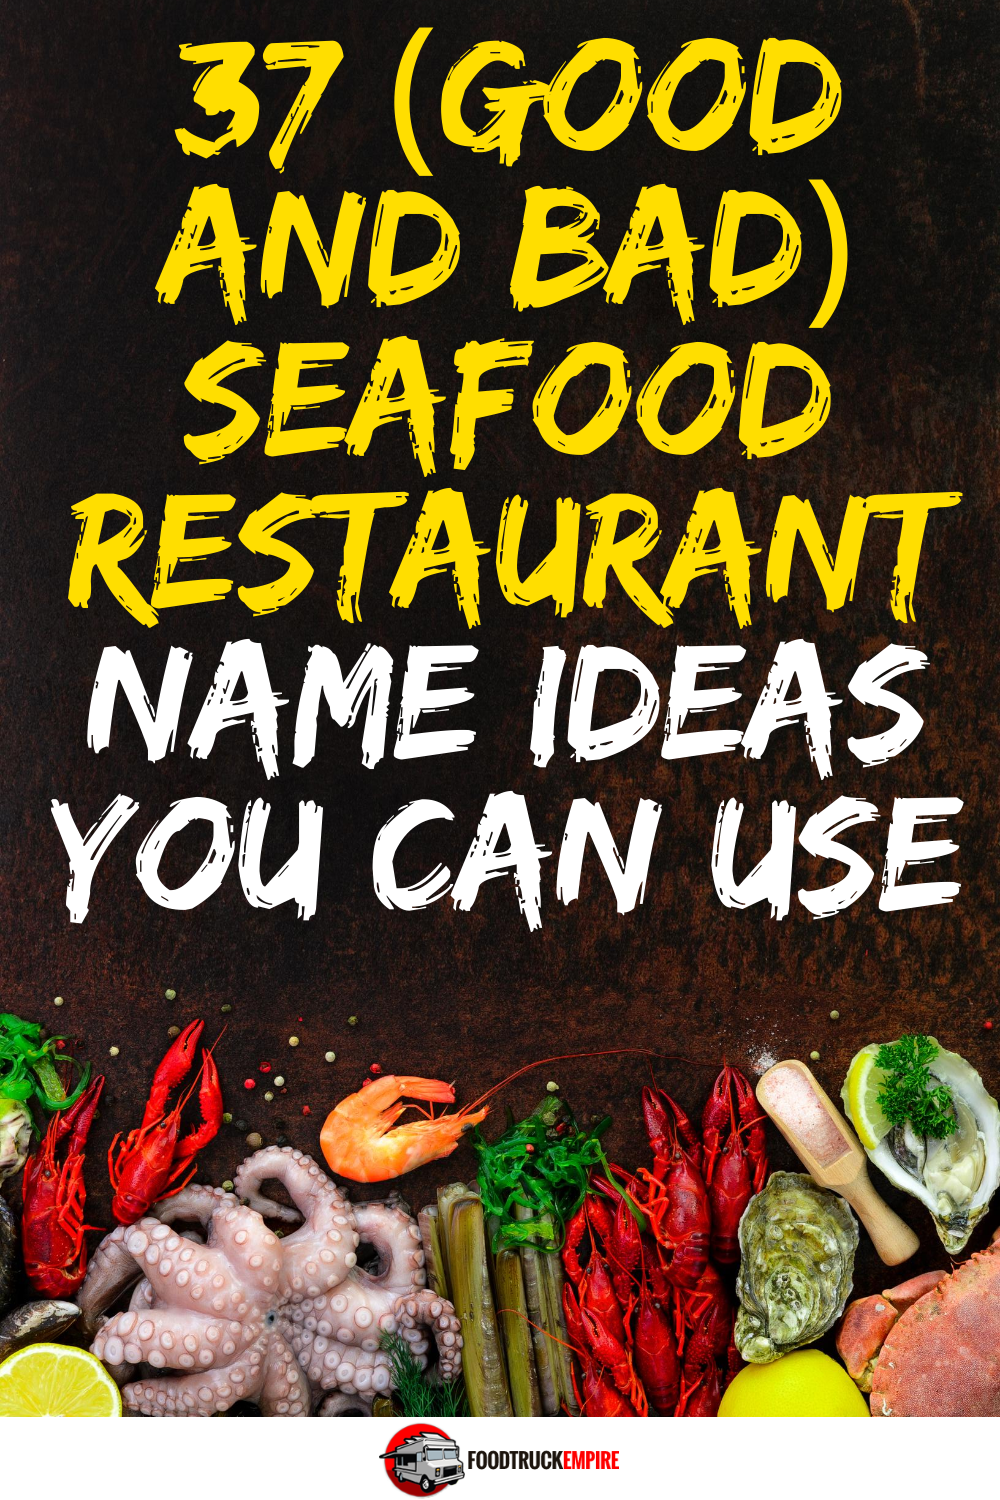 37 (Good and Bad) Seafood Restaurant Name Ideas You Can Use